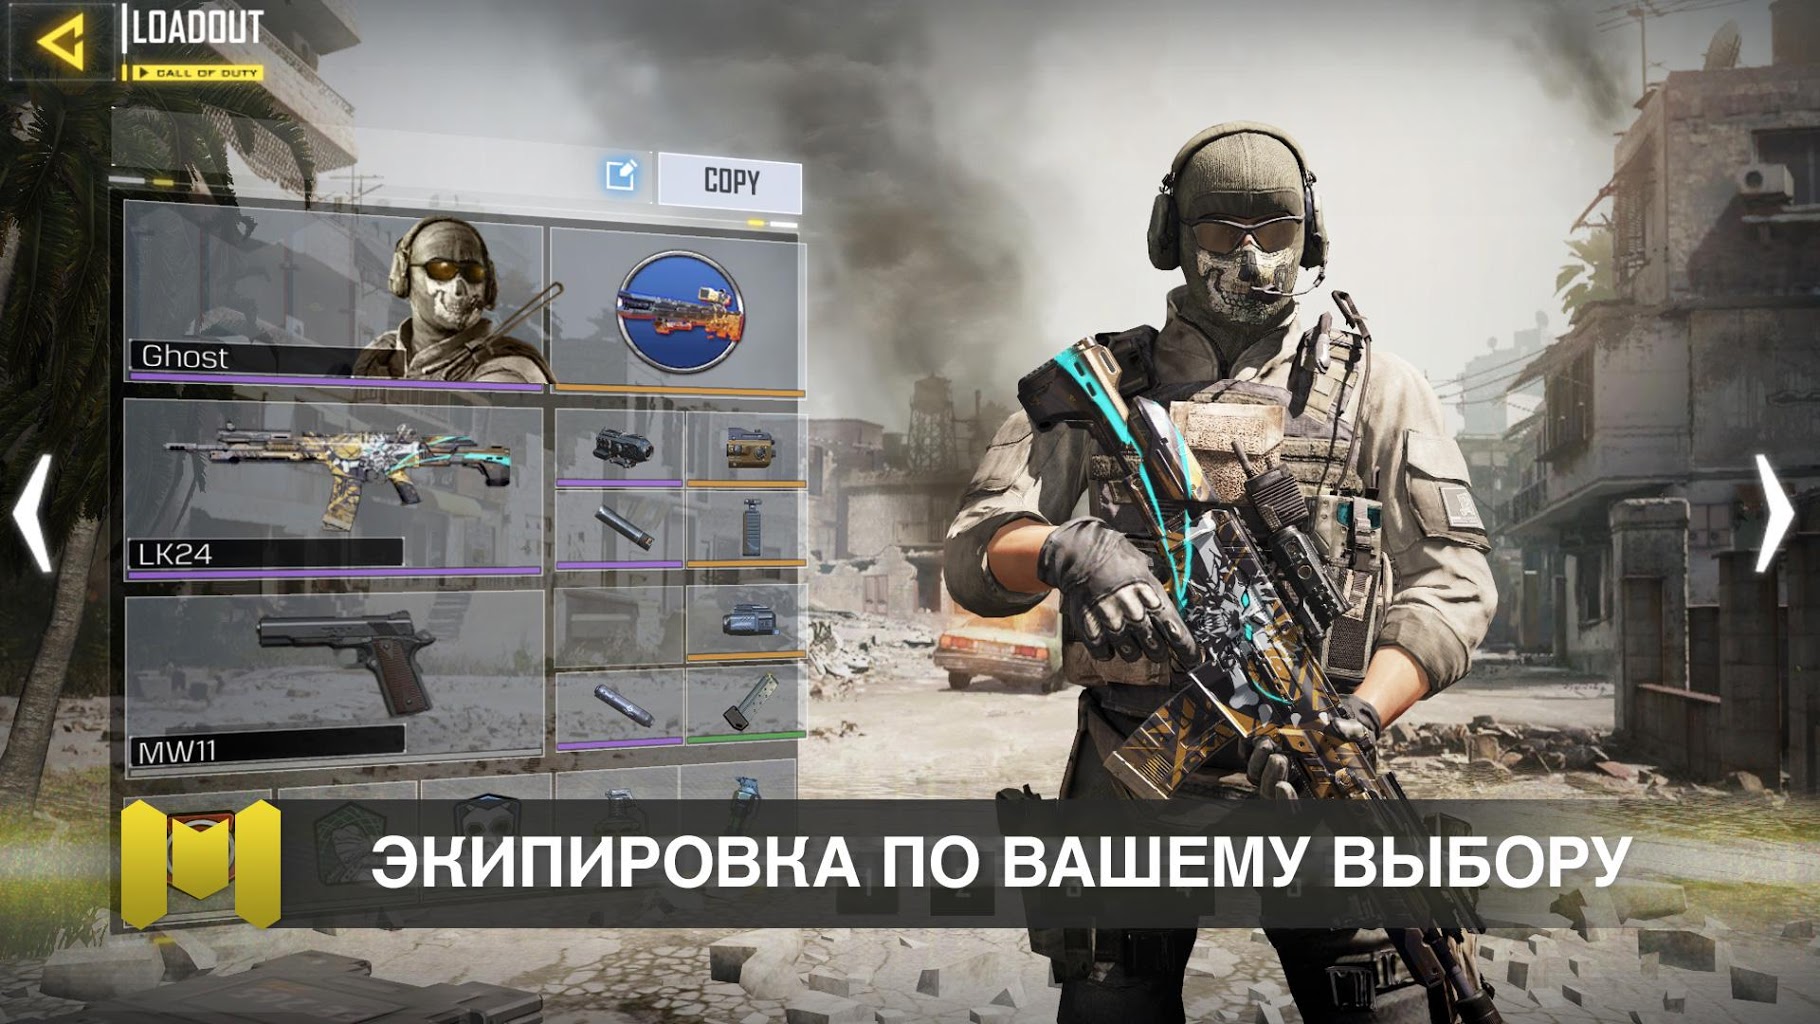 Call of Duty: Mobile 1.0.34 APK for Android - Download - AndroidAPKsFree